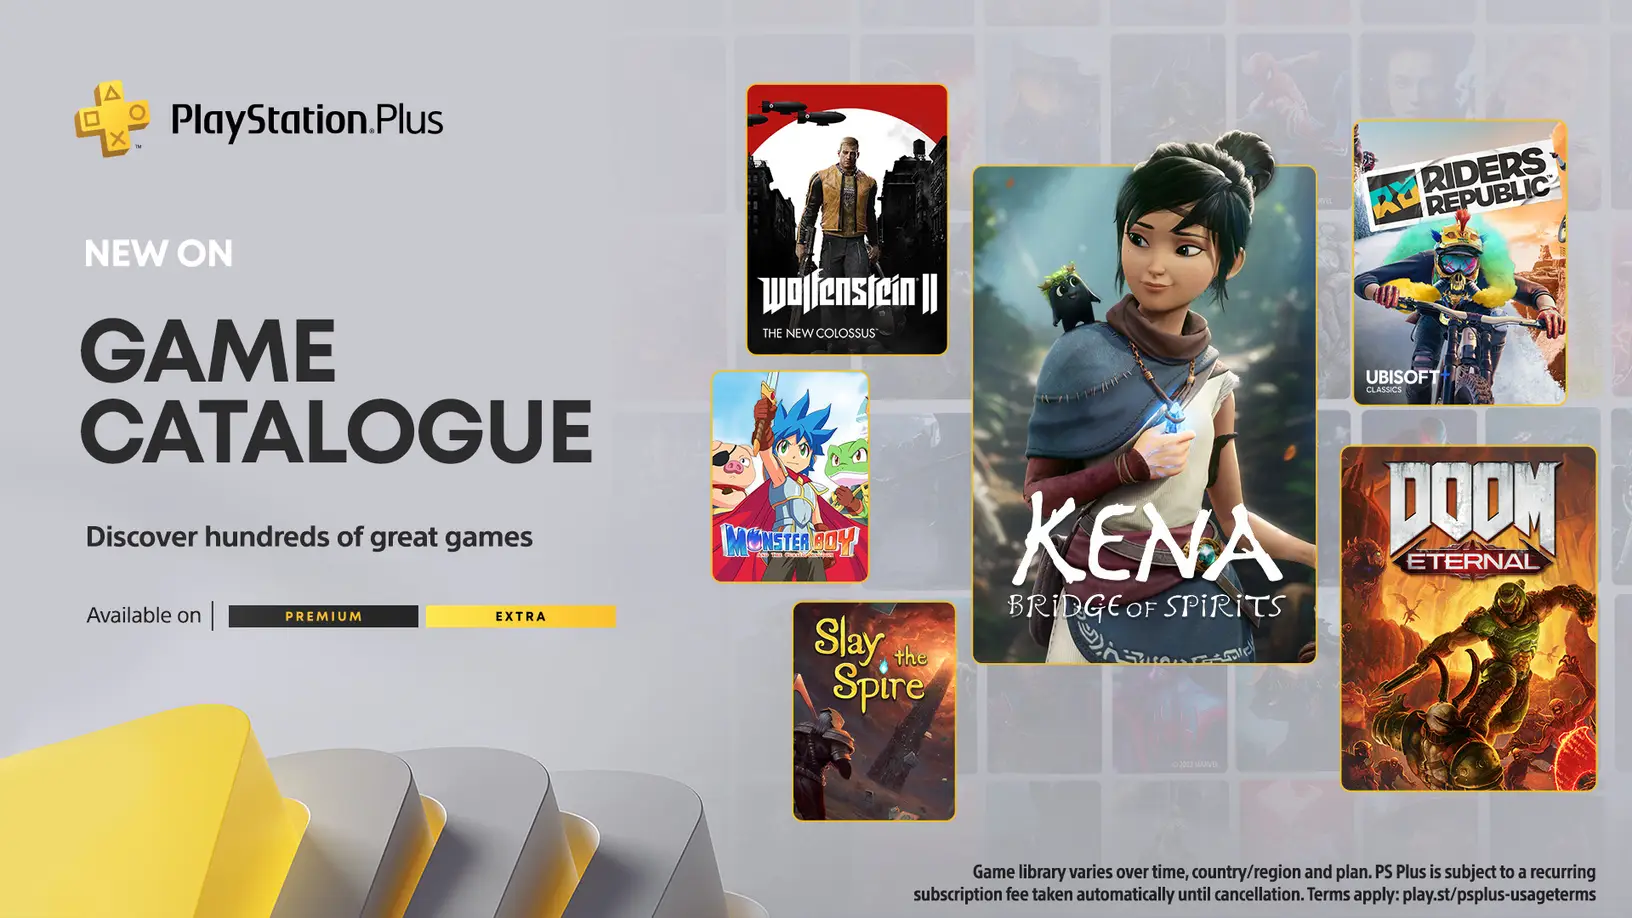 PlayStation Plus Free Games: What Should Sony Offer?